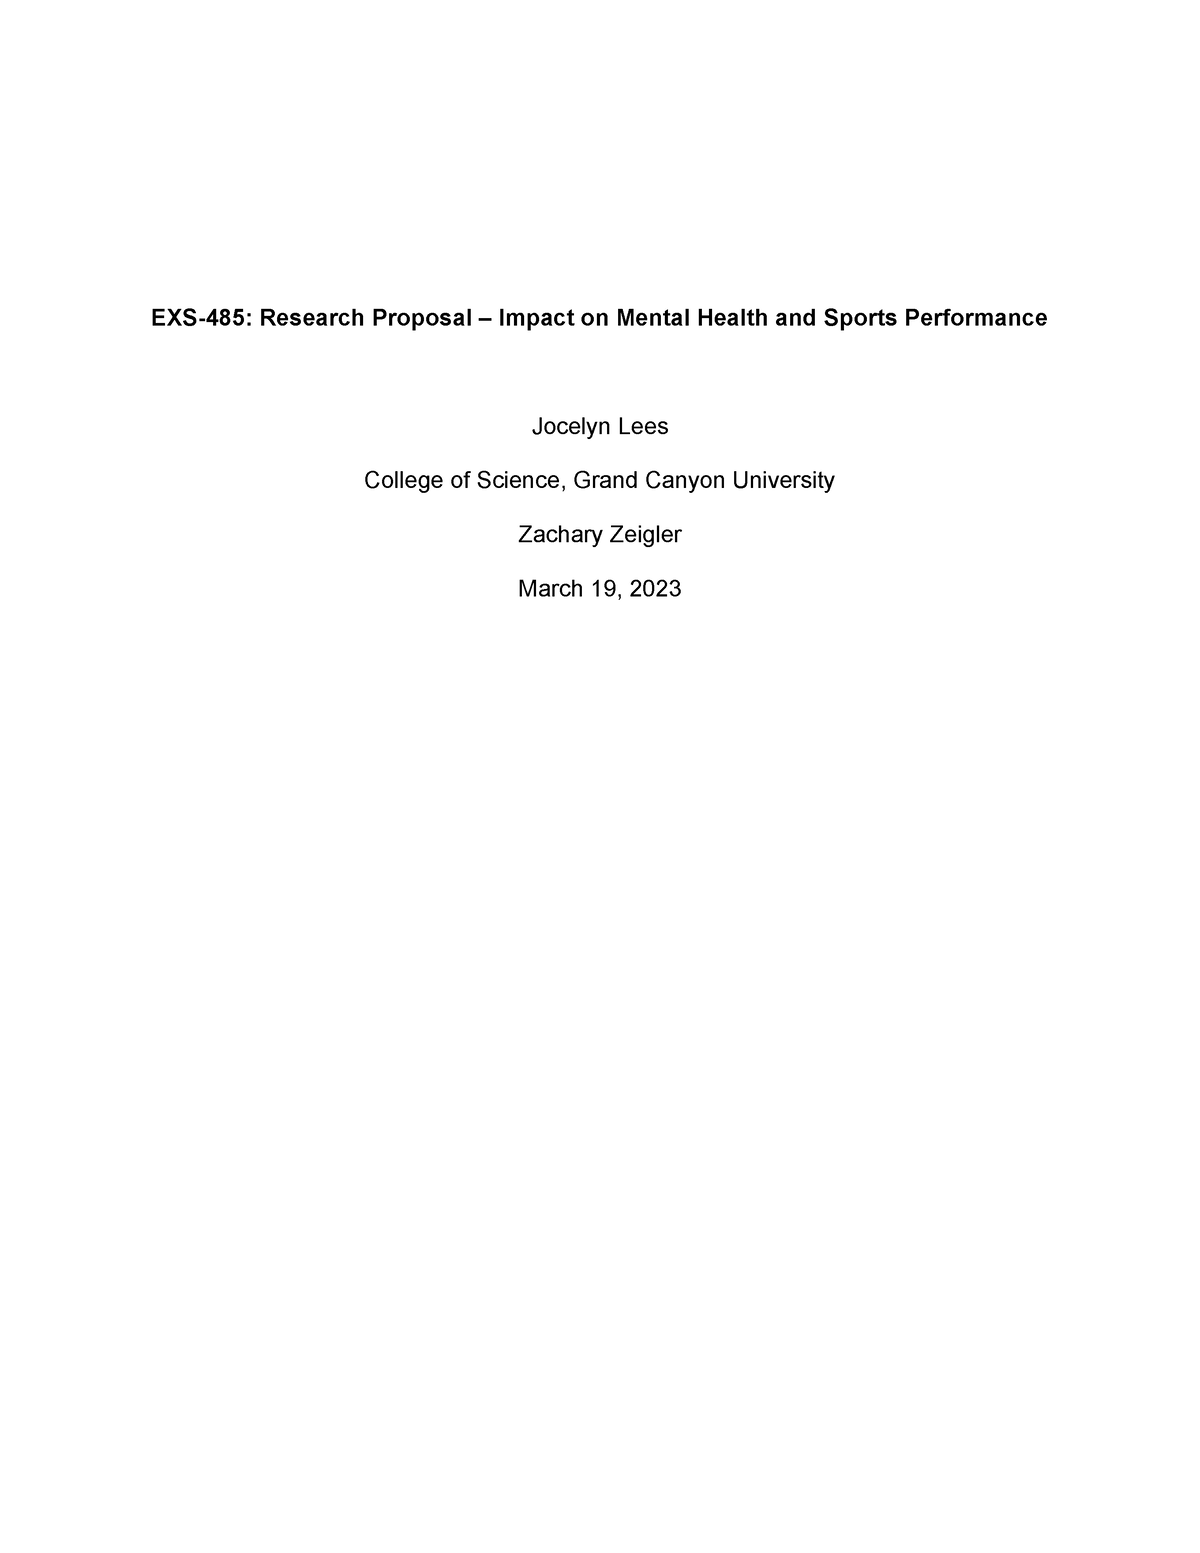 nih research proposal instructions